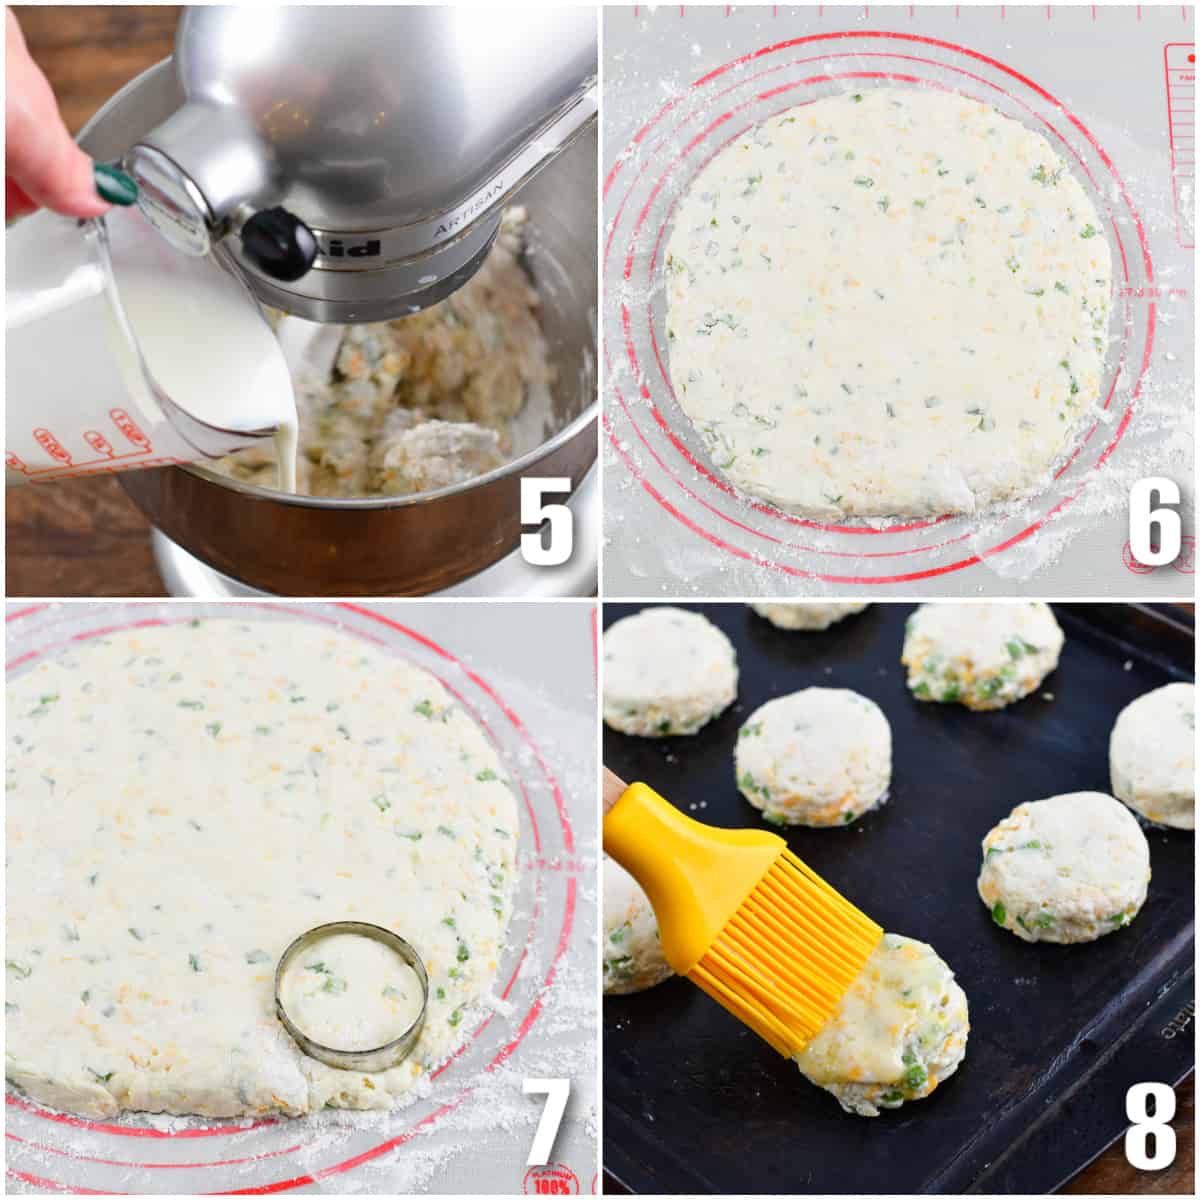 Collage of four images of pouring buttermilk into dough and forming the biscuits and putting them on a baking sheet.